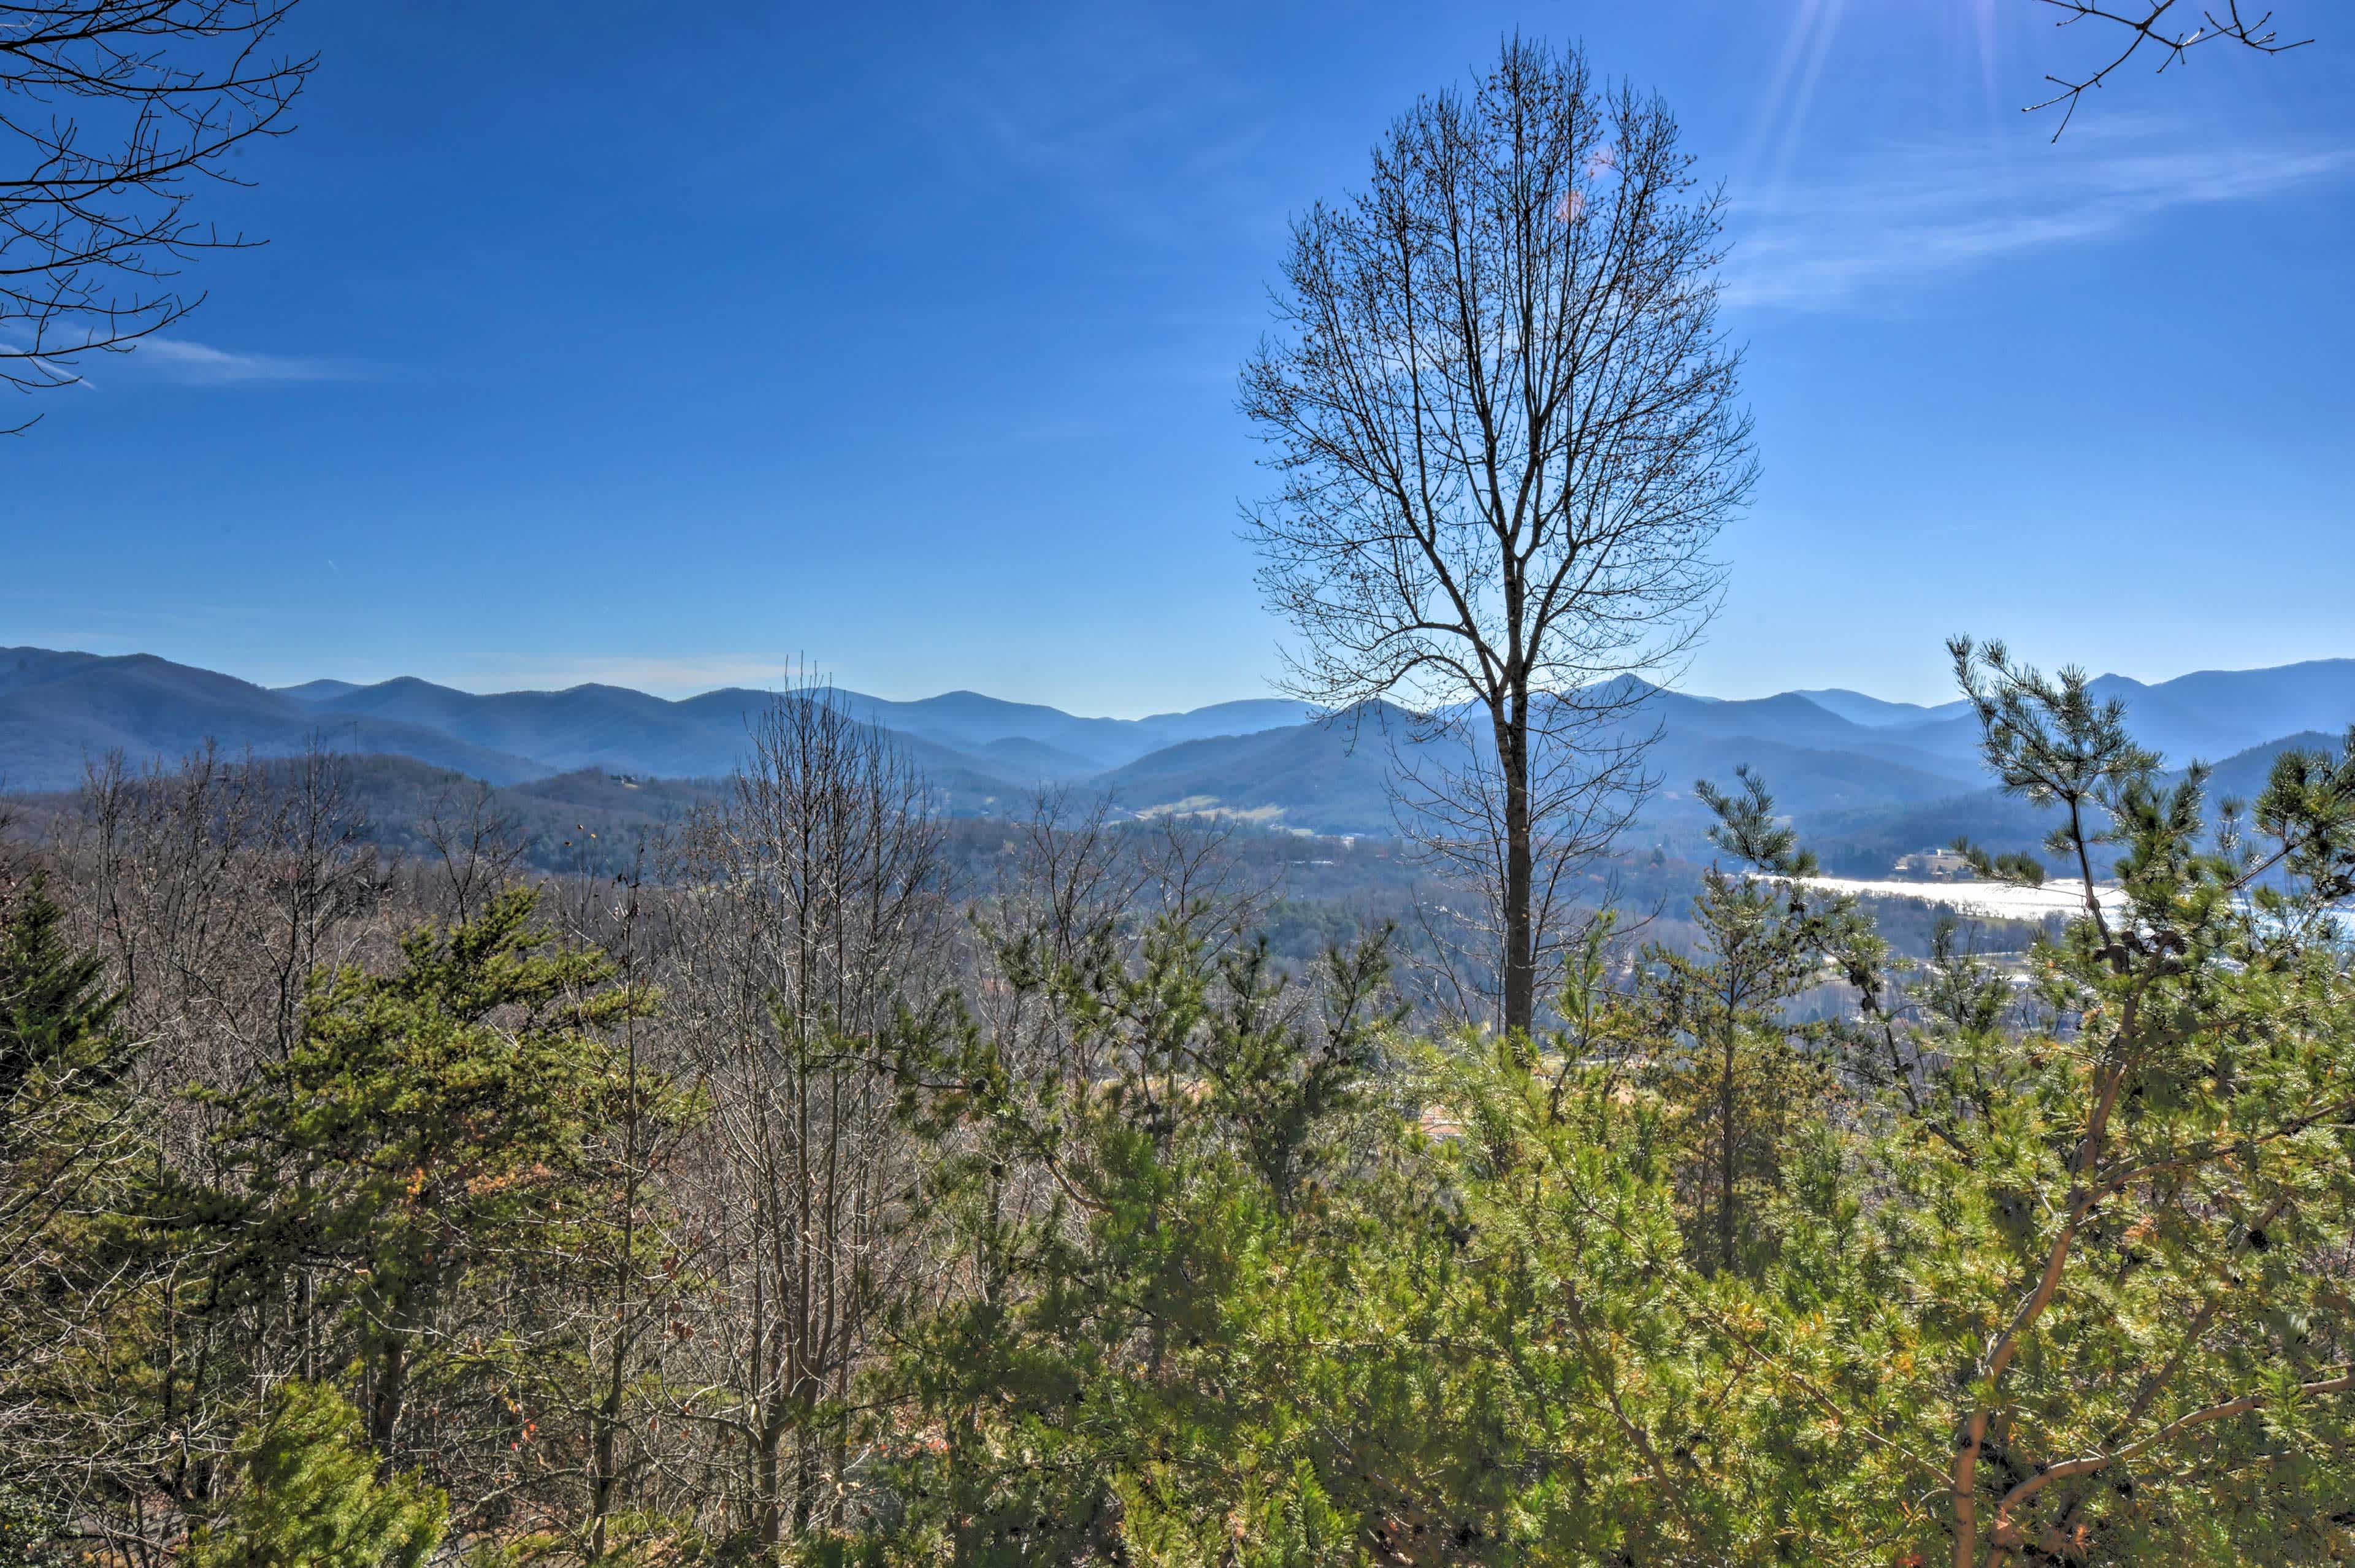 View of trees with mountains in the backbround in Hiawassee, GA